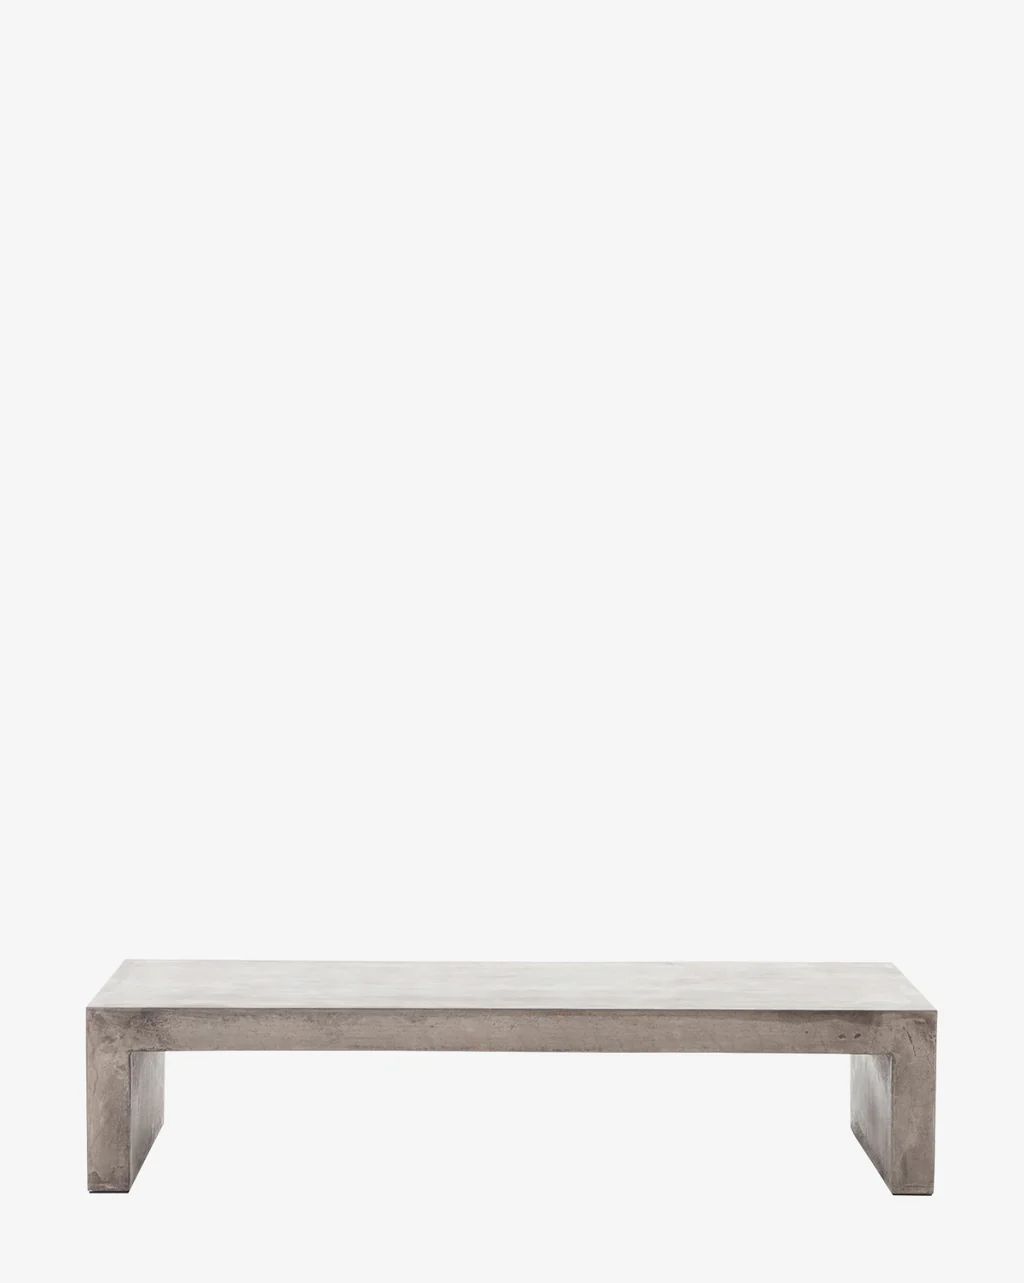 Thaxton Outdoor Coffee Table | McGee & Co.